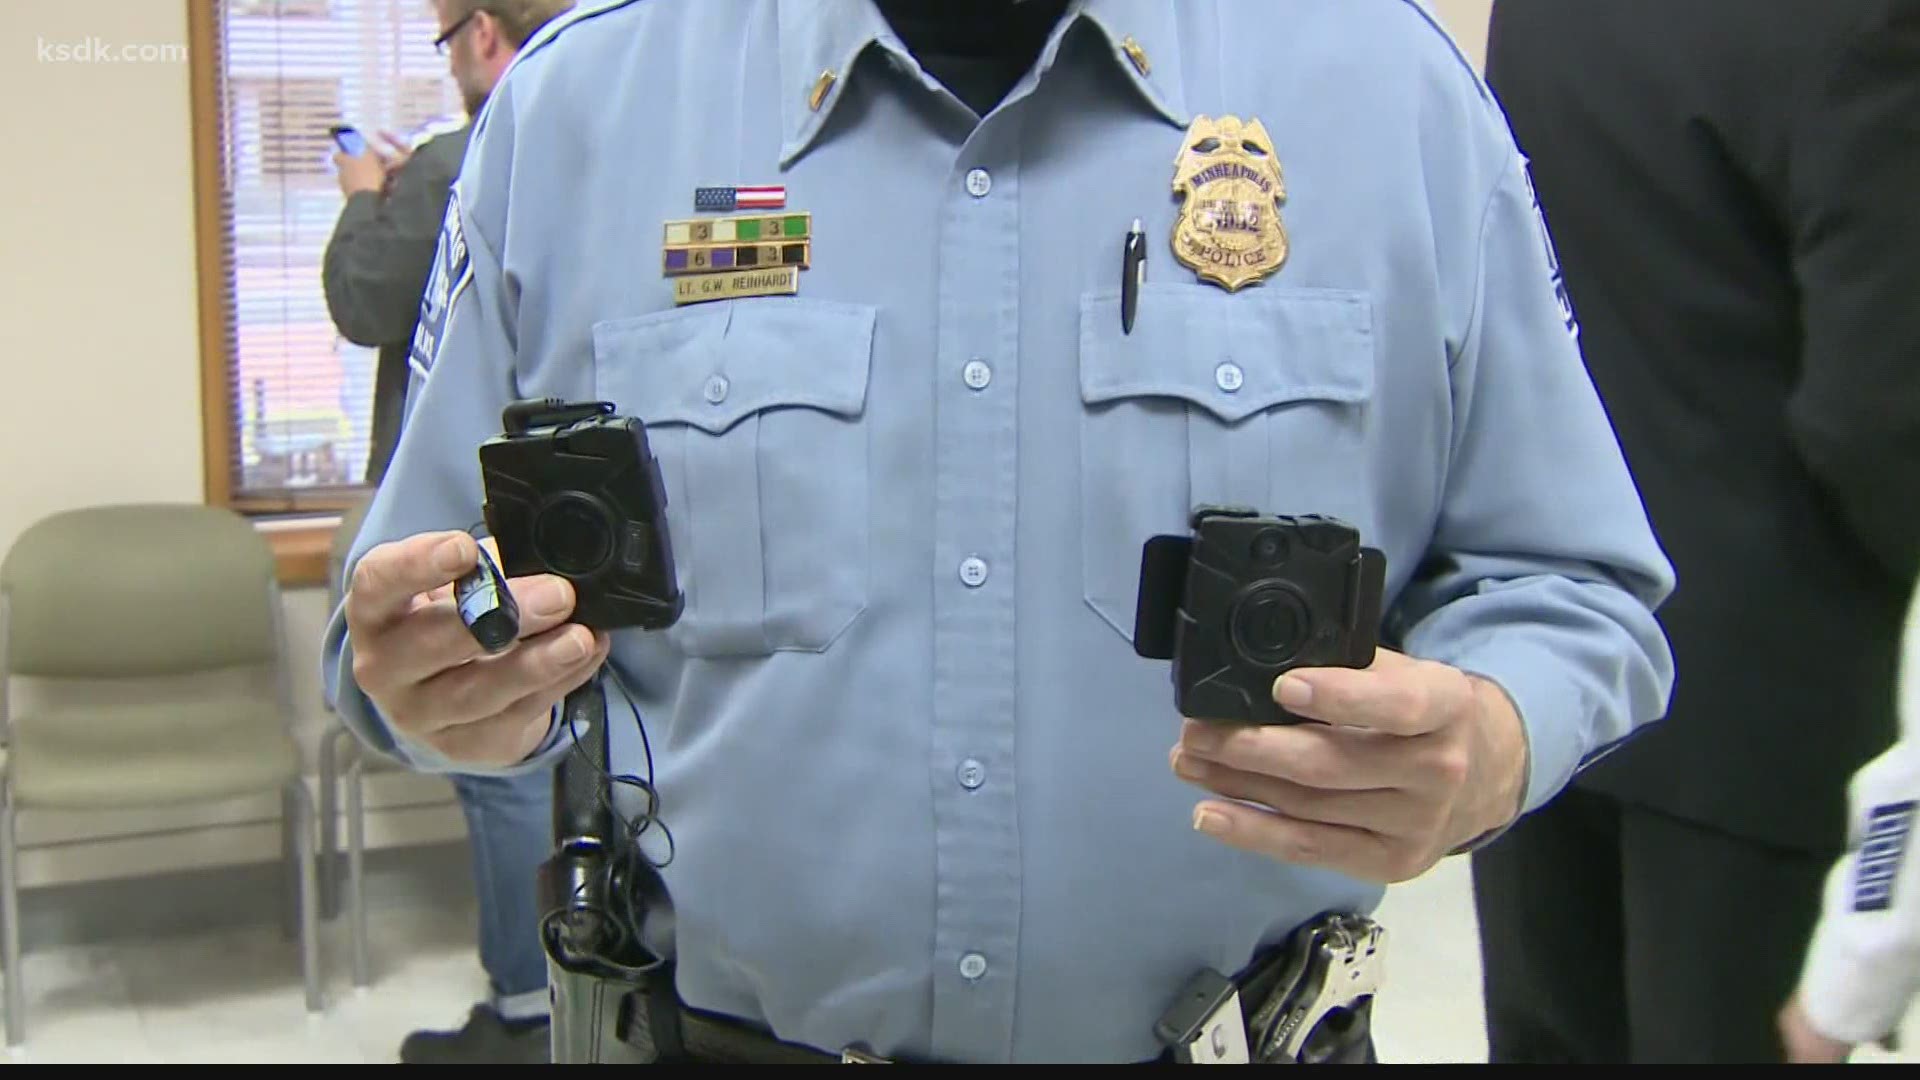 City is set to spend $6 million on equipping officers with body cameras